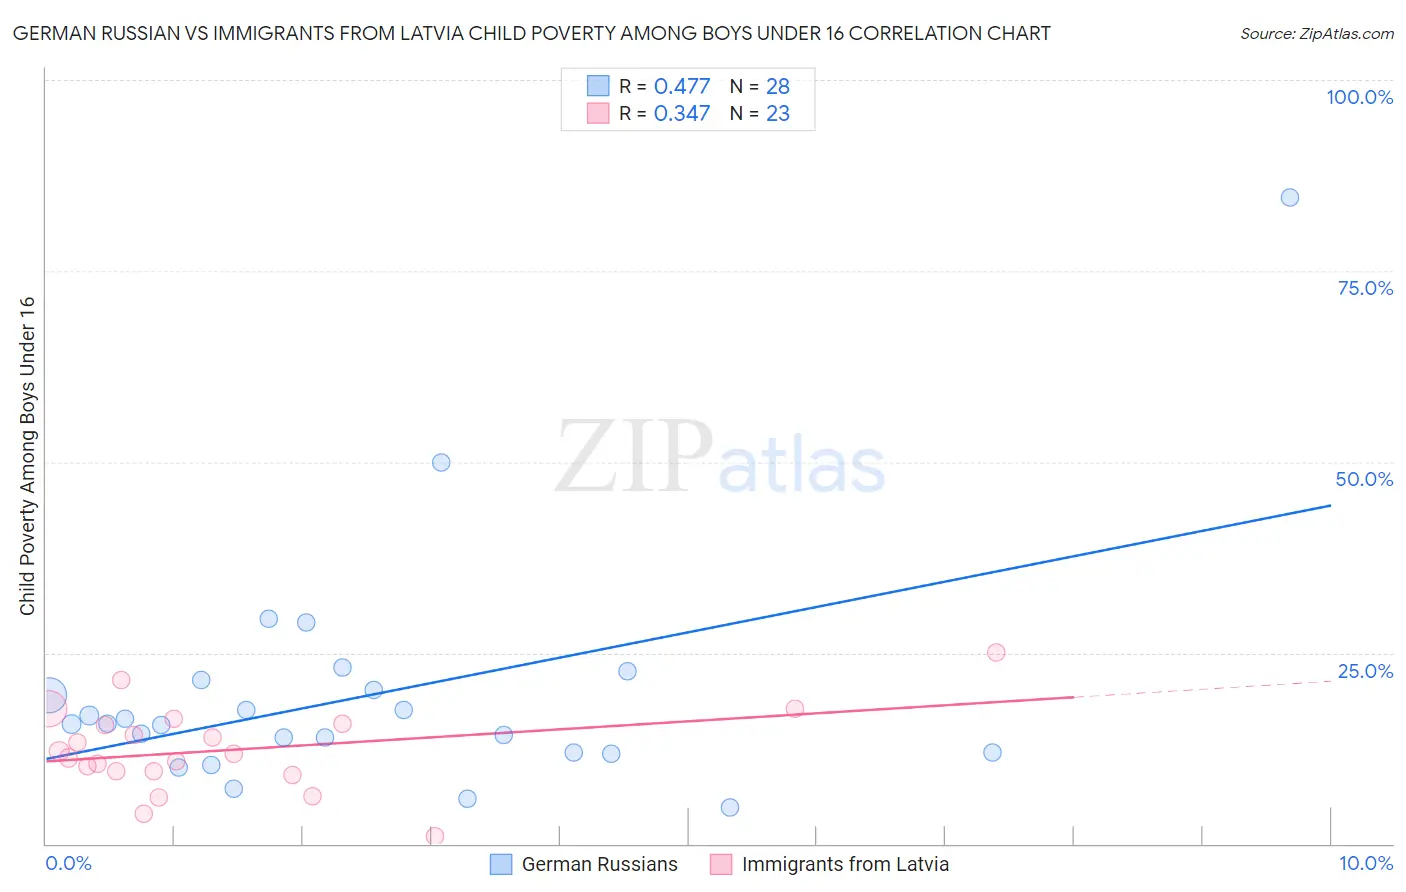 German Russian vs Immigrants from Latvia Child Poverty Among Boys Under 16